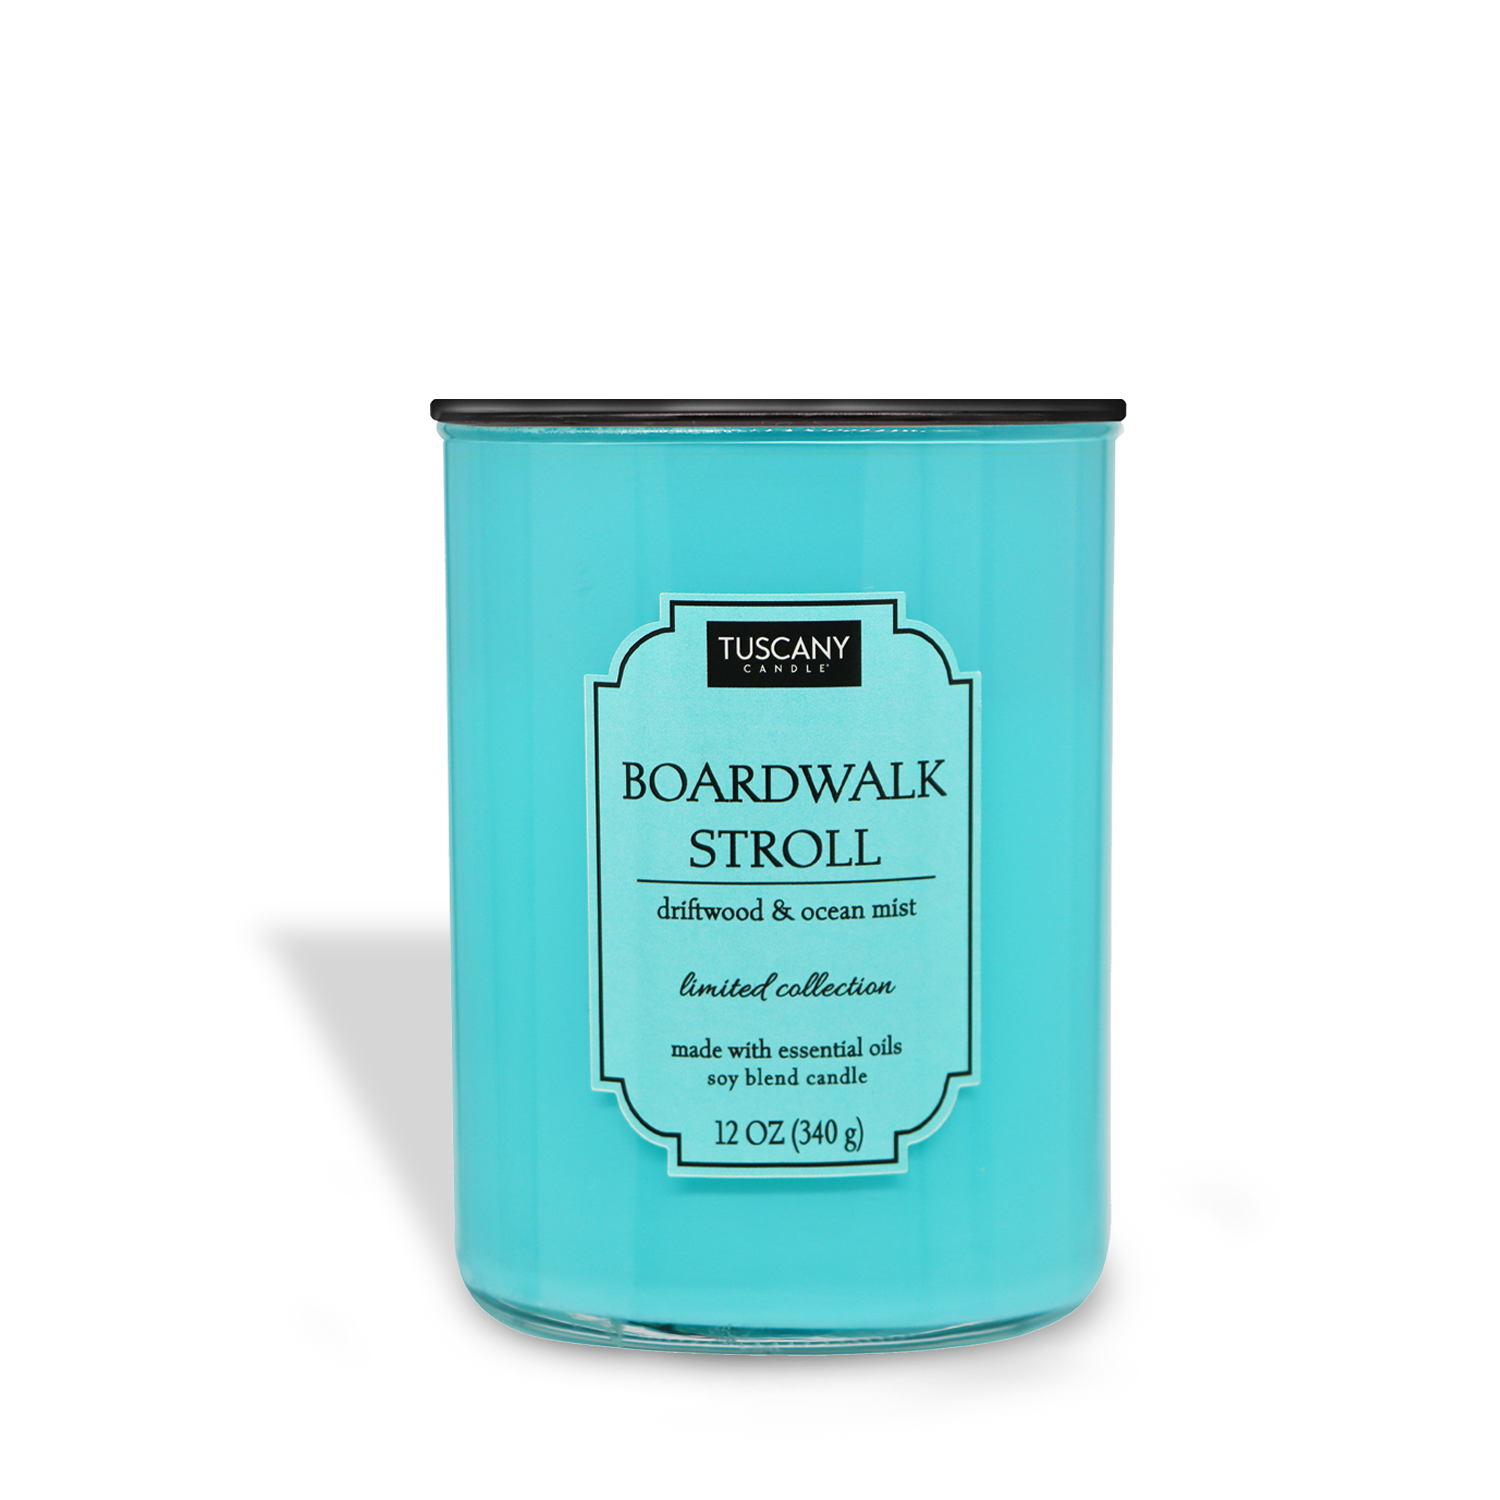 A turquoise-colored candle in a tin labeled "Boardwalk Stroll (12 oz) – Colorsplash Collection" with text describing it as a limited collection, made with essential oils, and weighing 12 oz by Tuscany Candle® EVD.